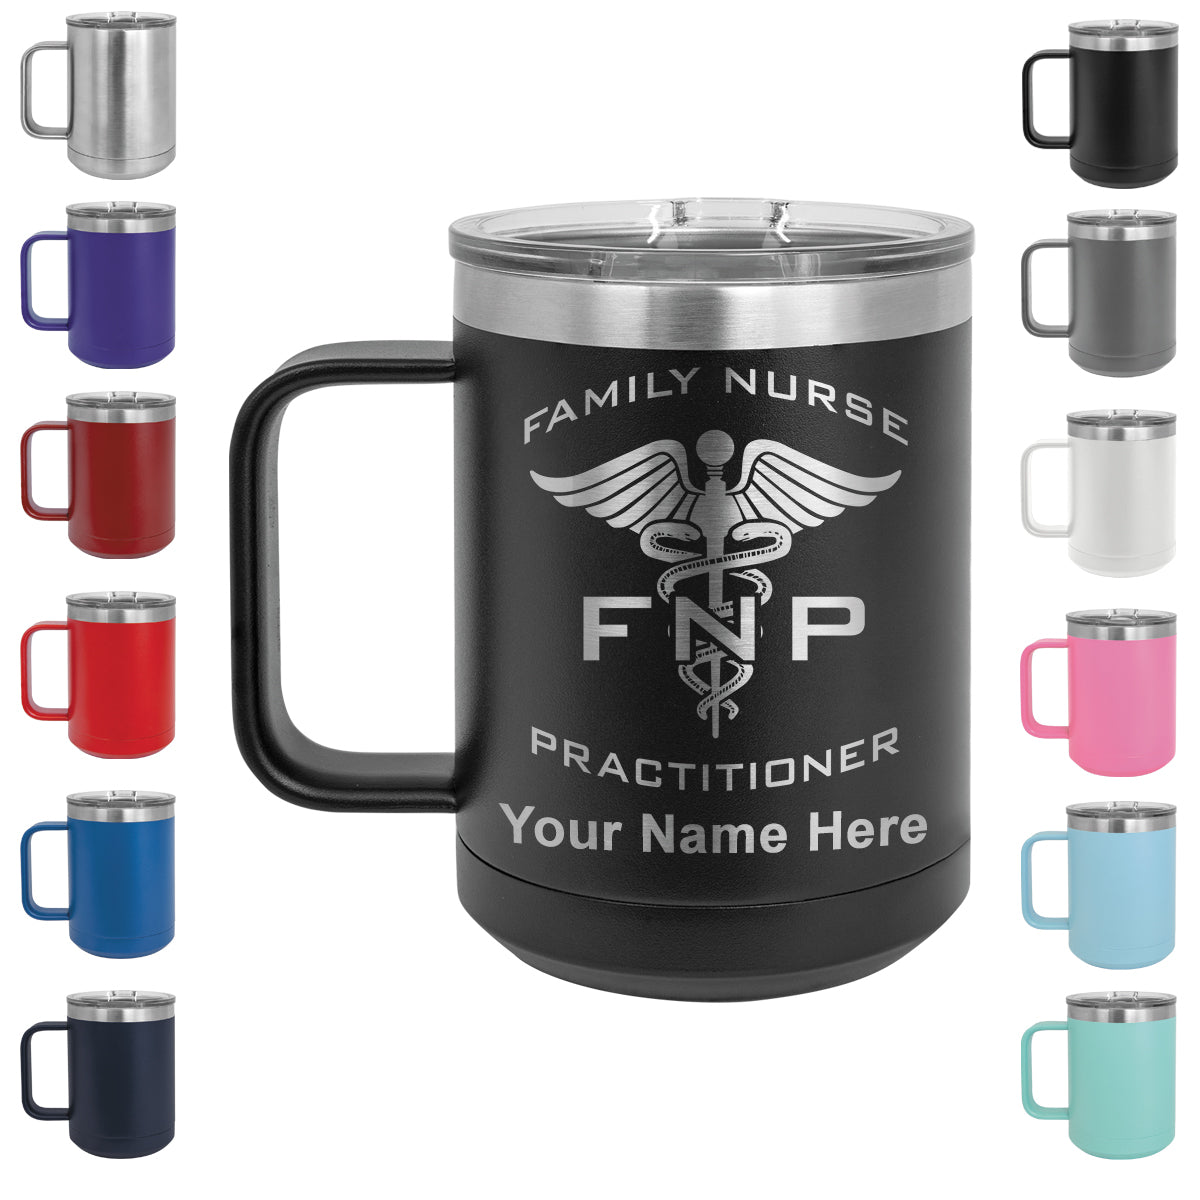 15oz Vacuum Insulated Coffee Mug, FNP Family Nurse Practitioner, Personalized Engraving Included